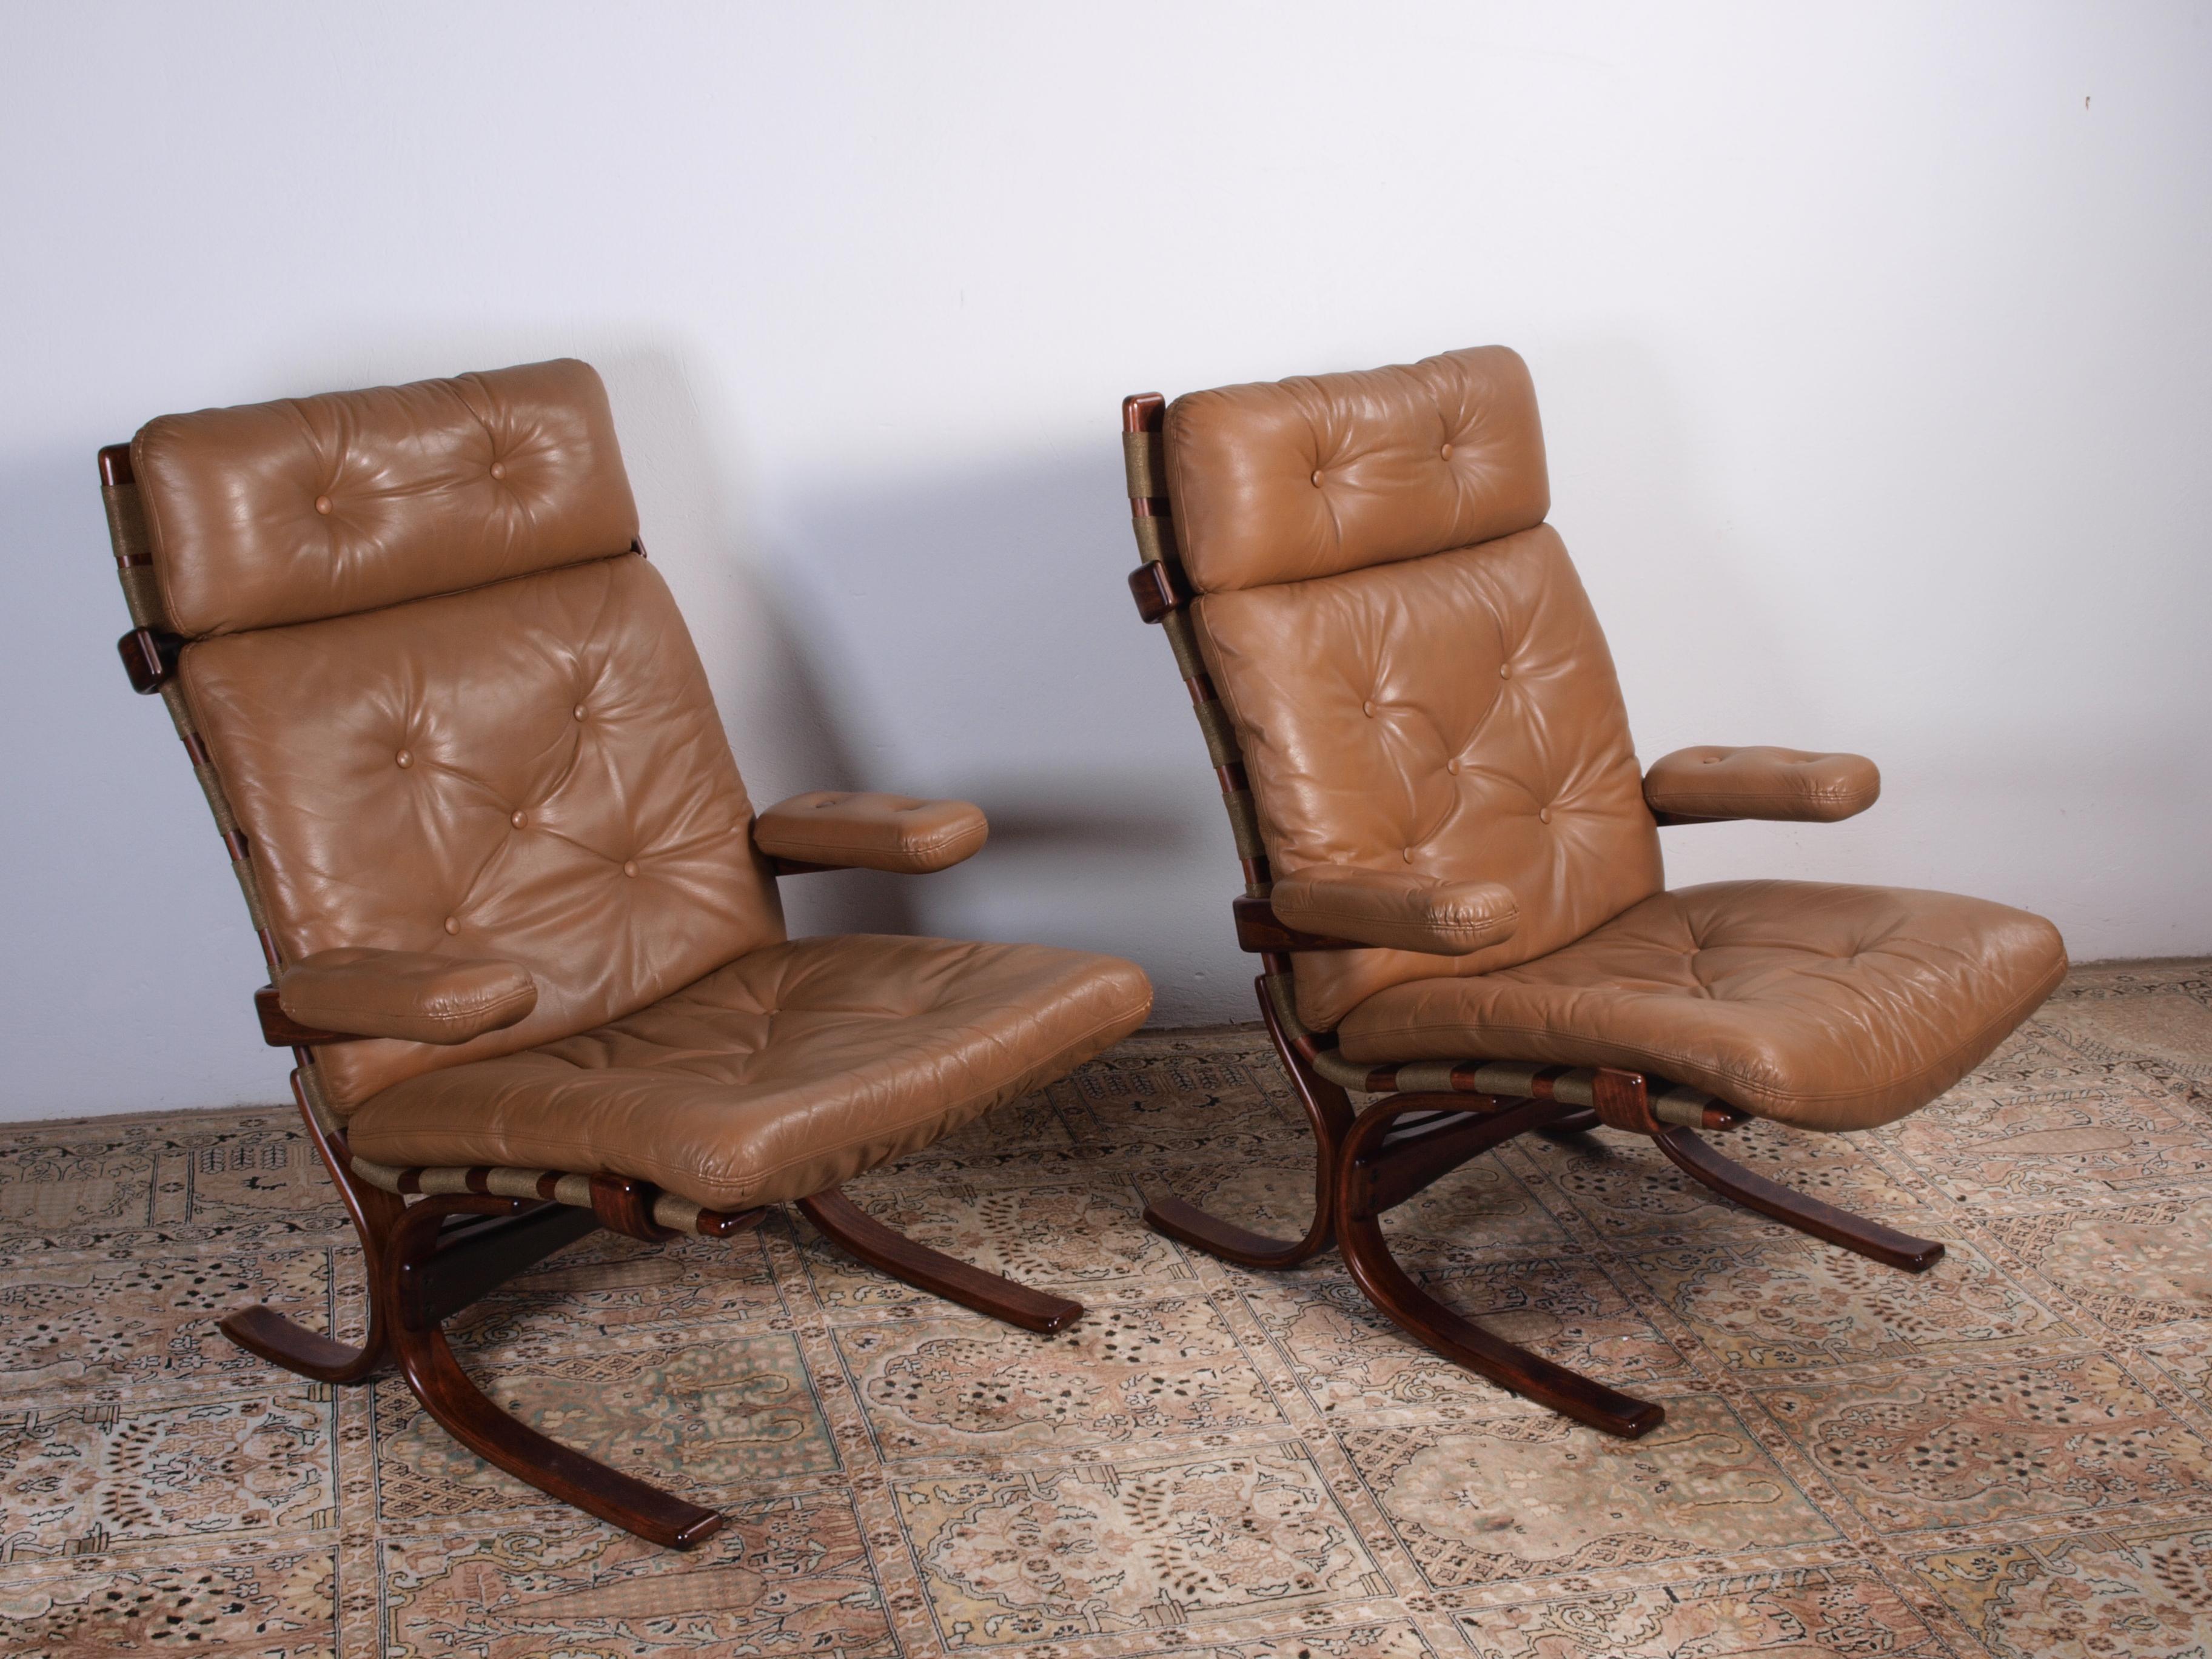 Late 20th Century Norwegian Cantilever Easy Chairs in Leather by Jon Hjortdal, Velledalen, 1970s